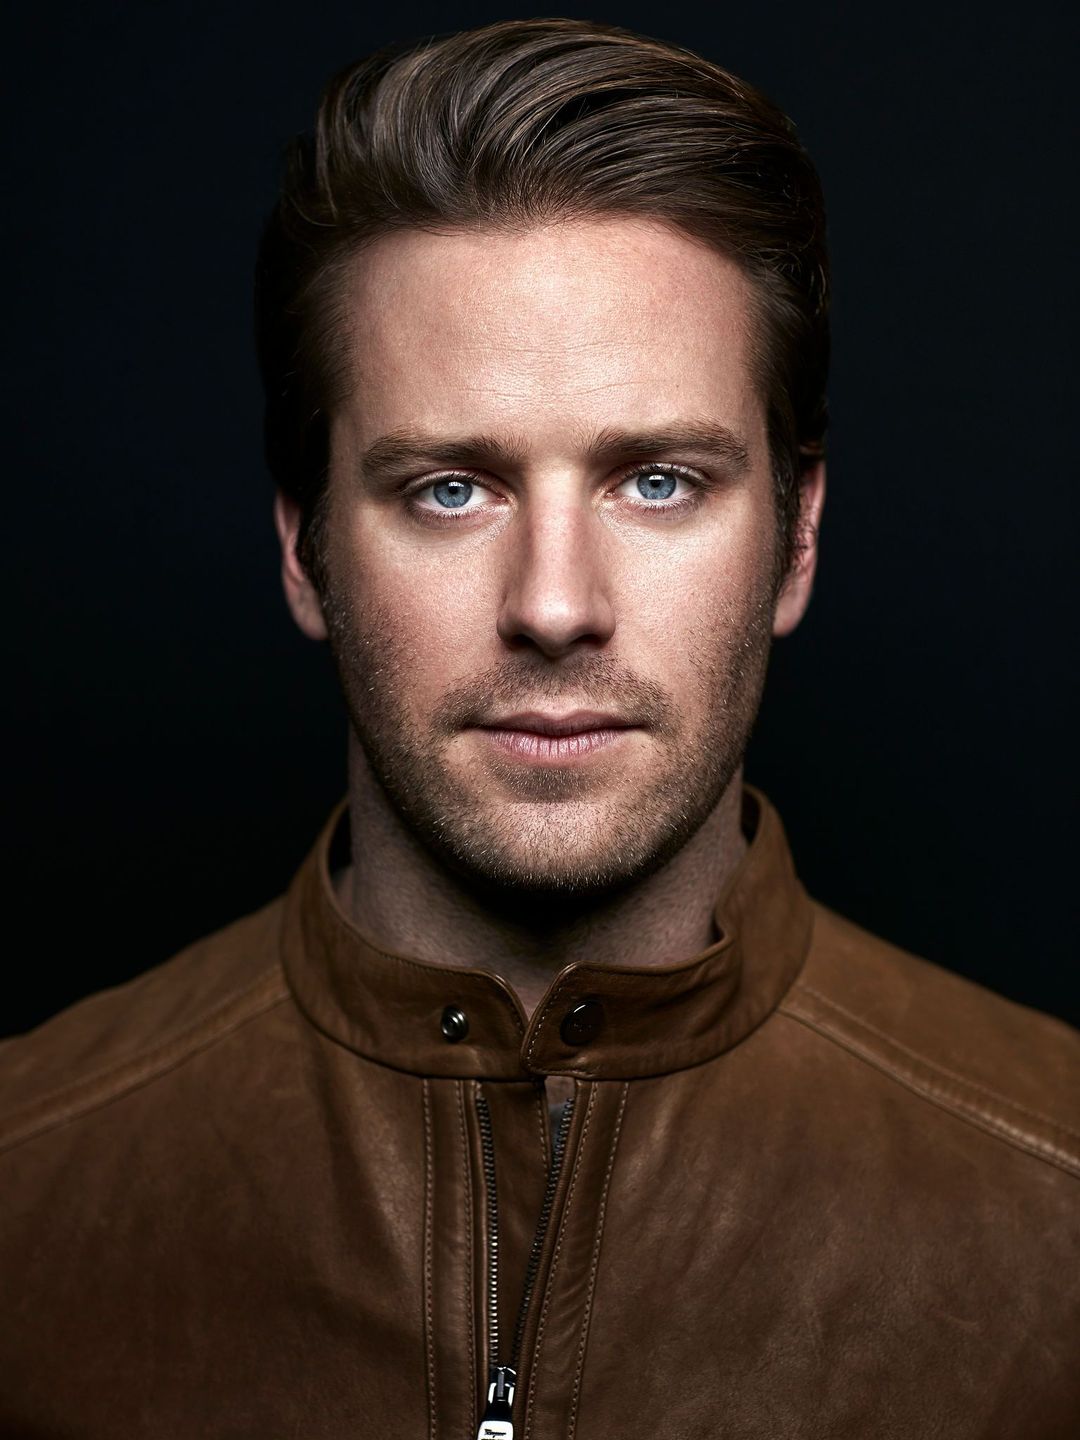 Armie Hammer young photos